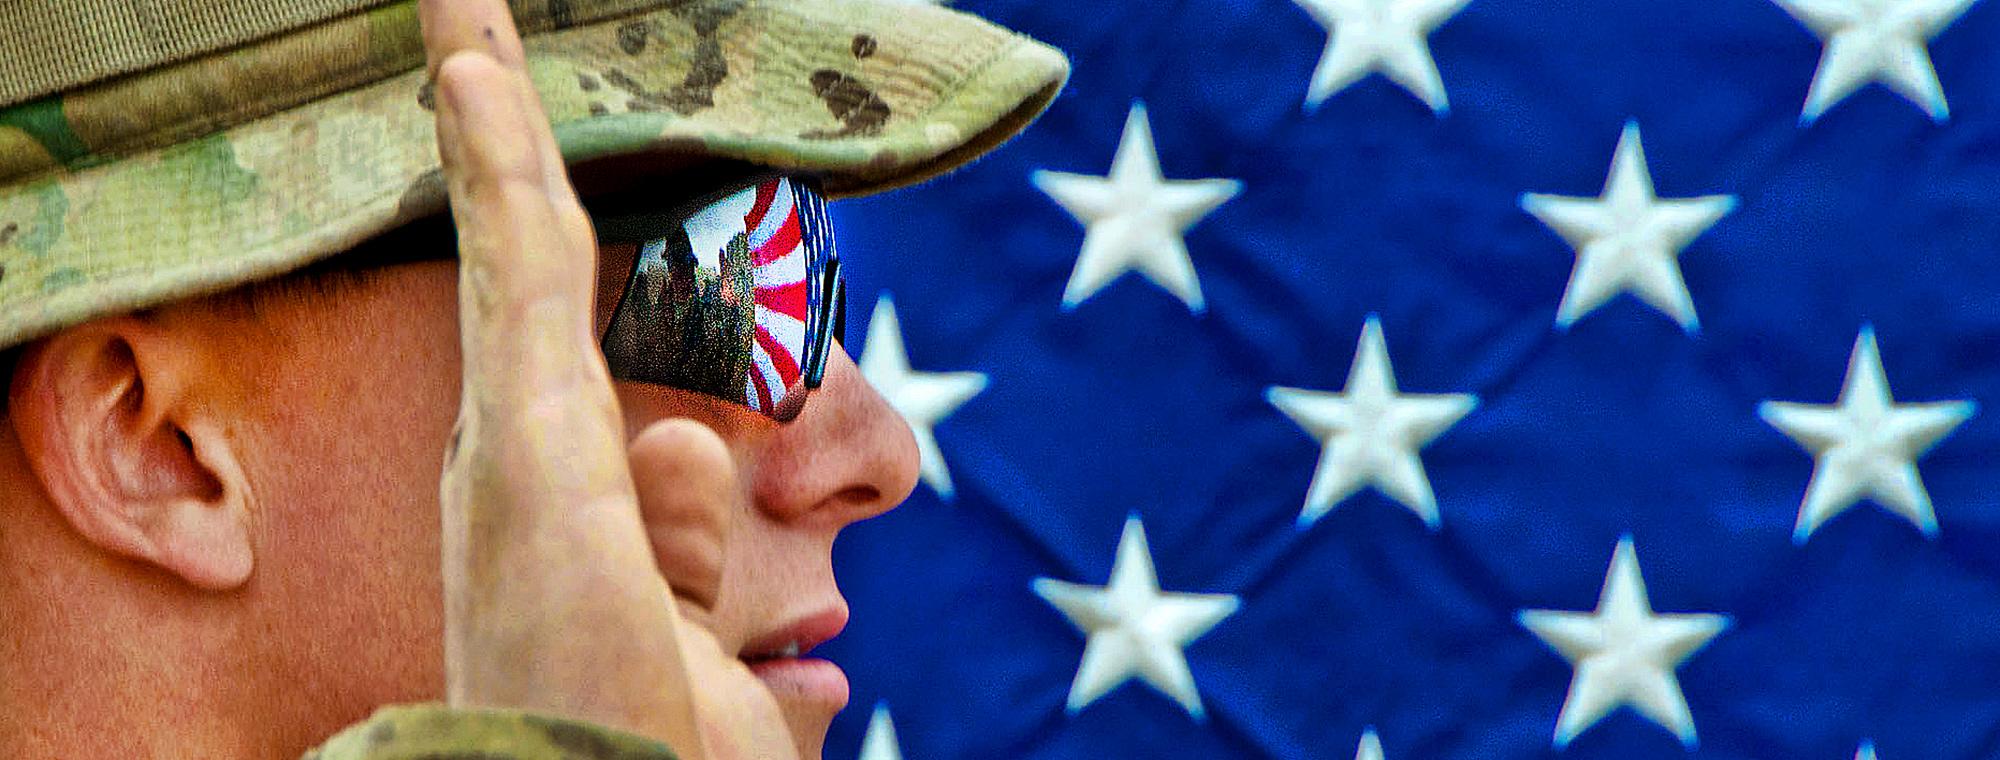 The American flag reflects in the glasses of an U.S. Army officer as he reenlists as a paratrooper on Combat Outpost Qara Baugh in Afghanistan's Ghazni province, April 22, 2012. The soldier is assigned to the 82nd Airborne Division’s 1st Brigade Combat Te